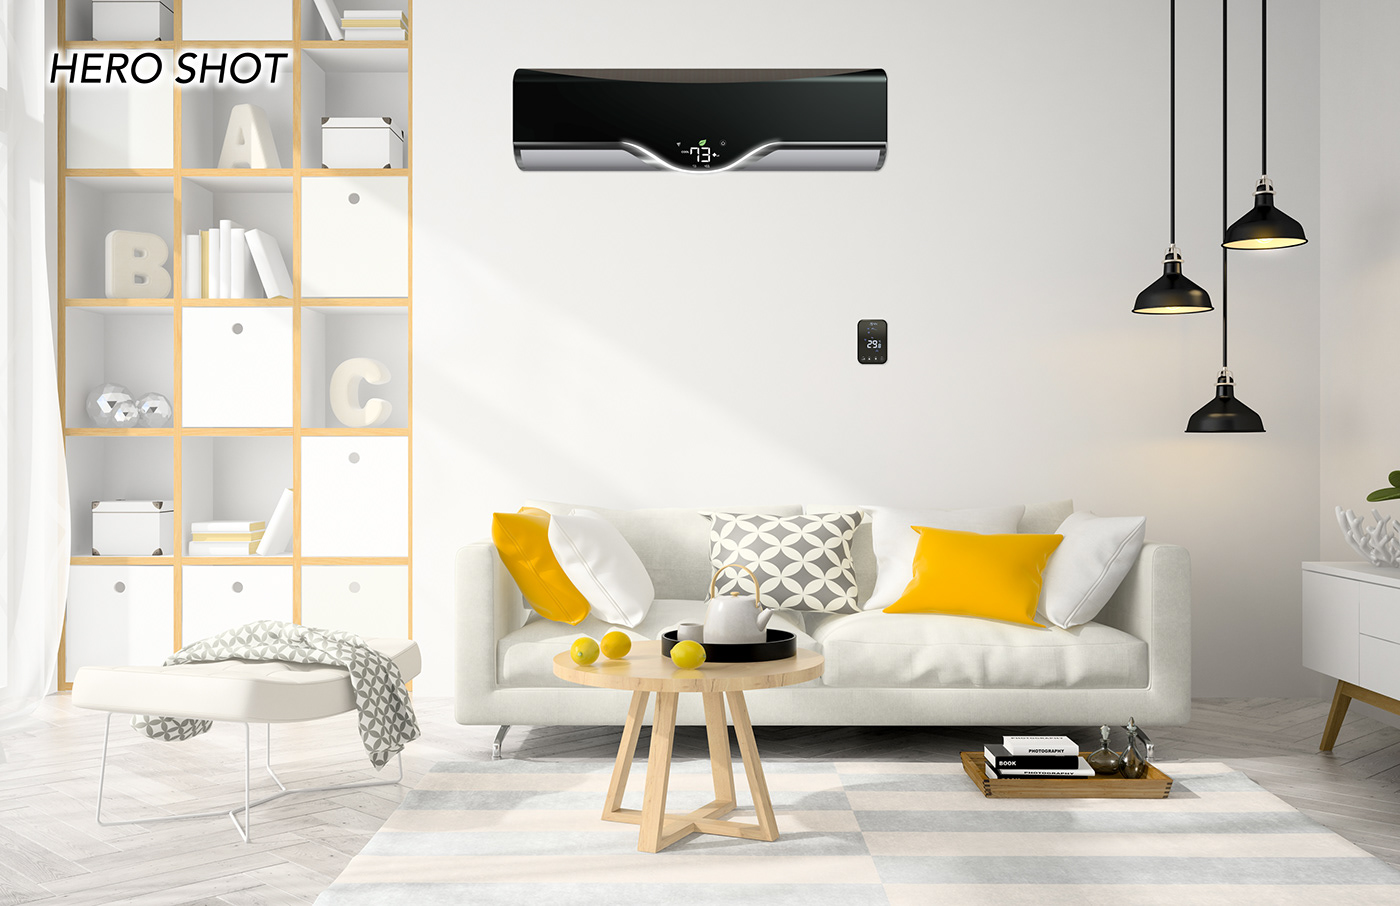 Air conditioner concept Consumer crossover electronic industrial design  product vietnam vingroup vinsmart